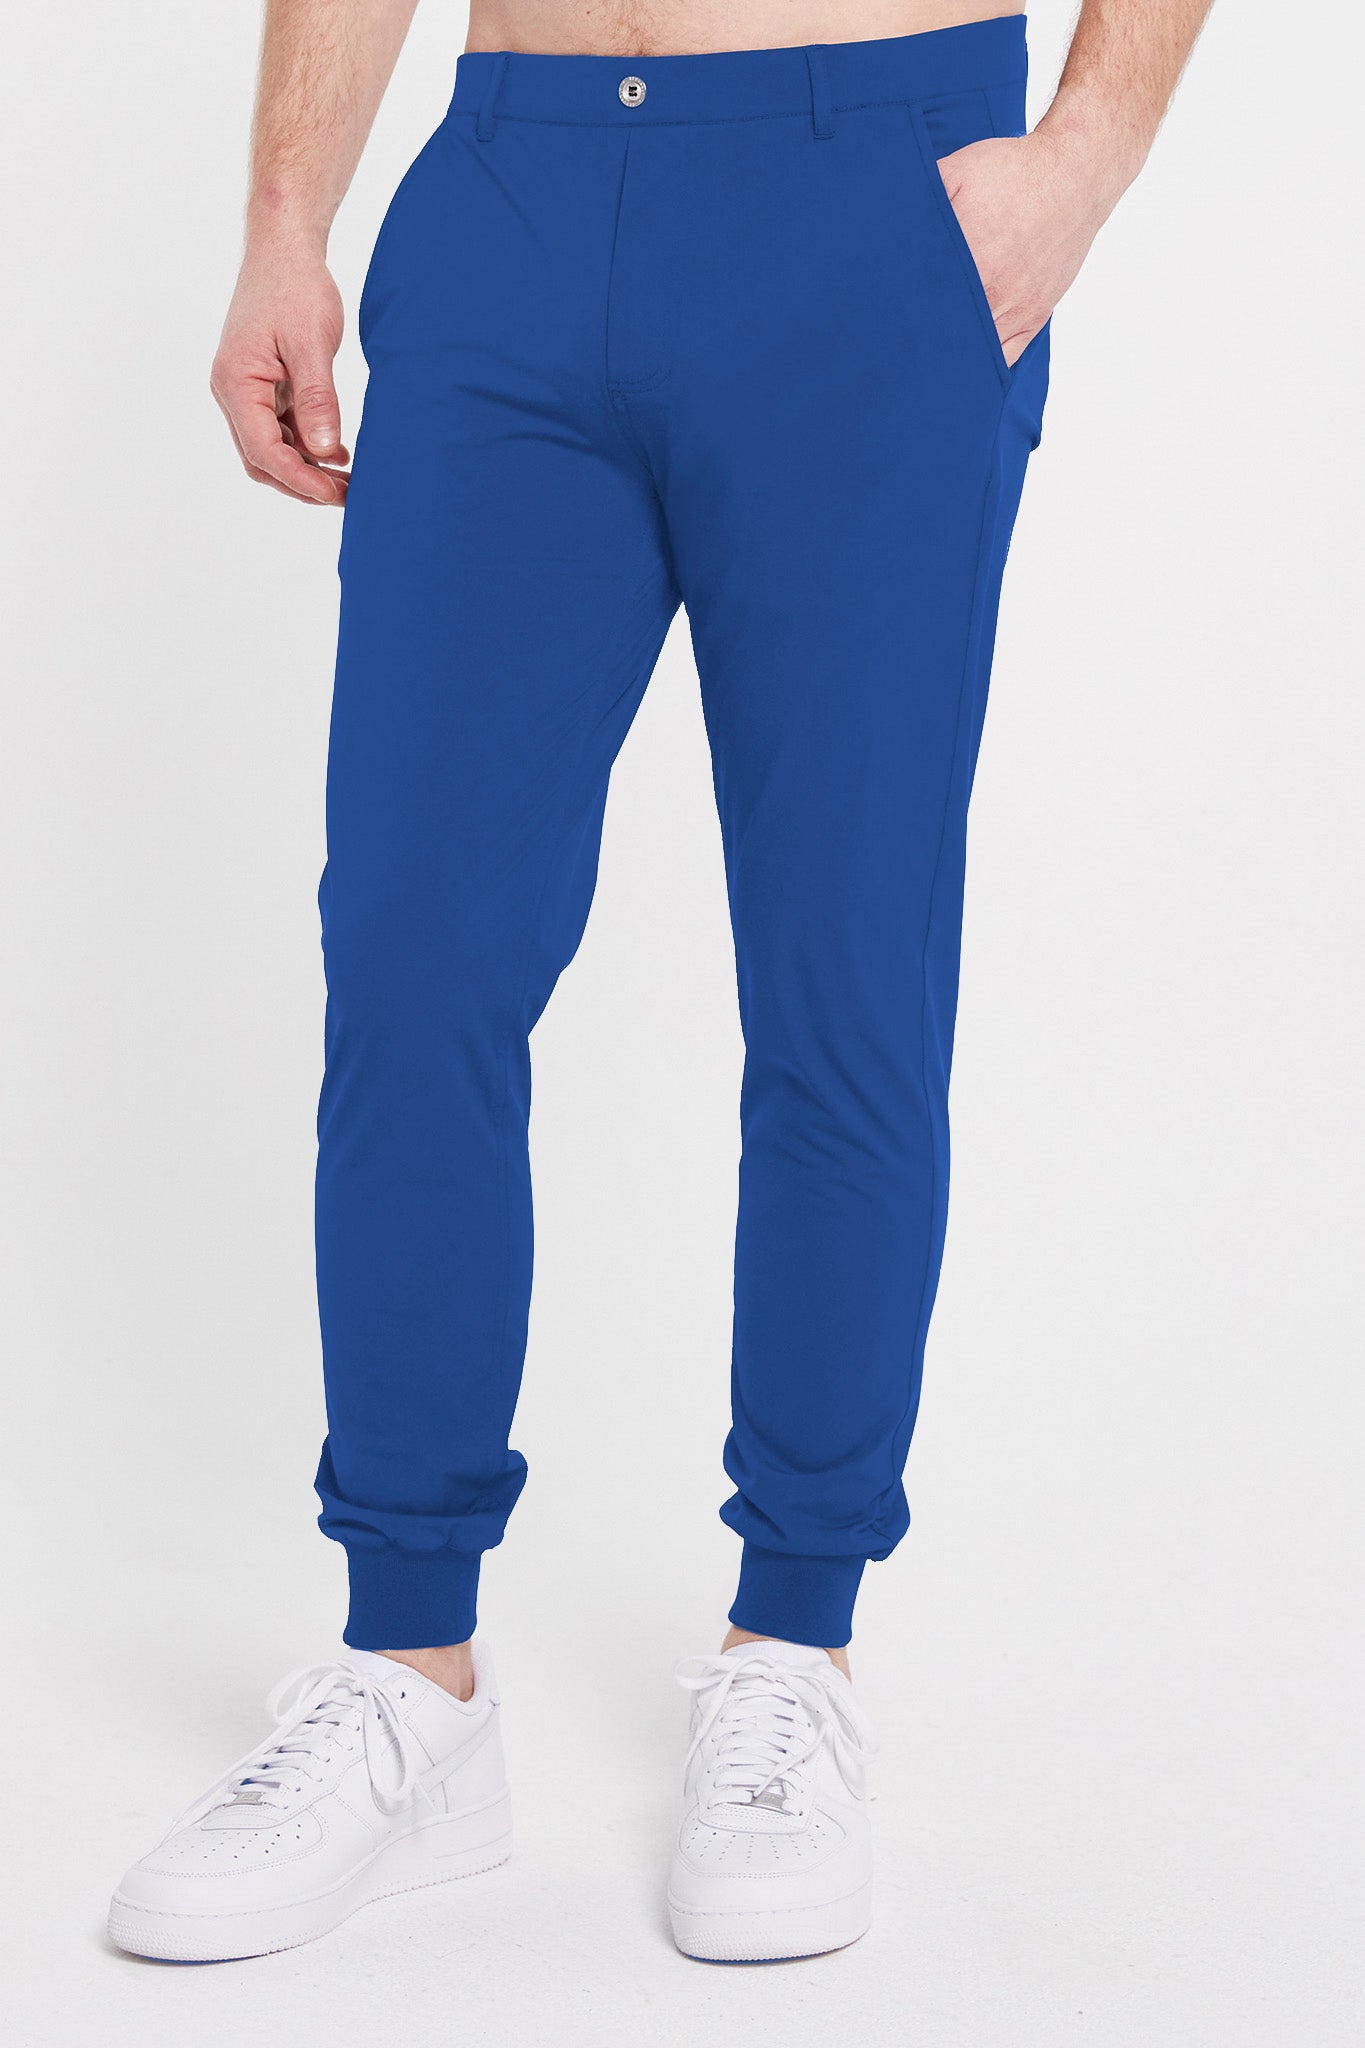 Image of the halliday pull-on jogger in classic blue